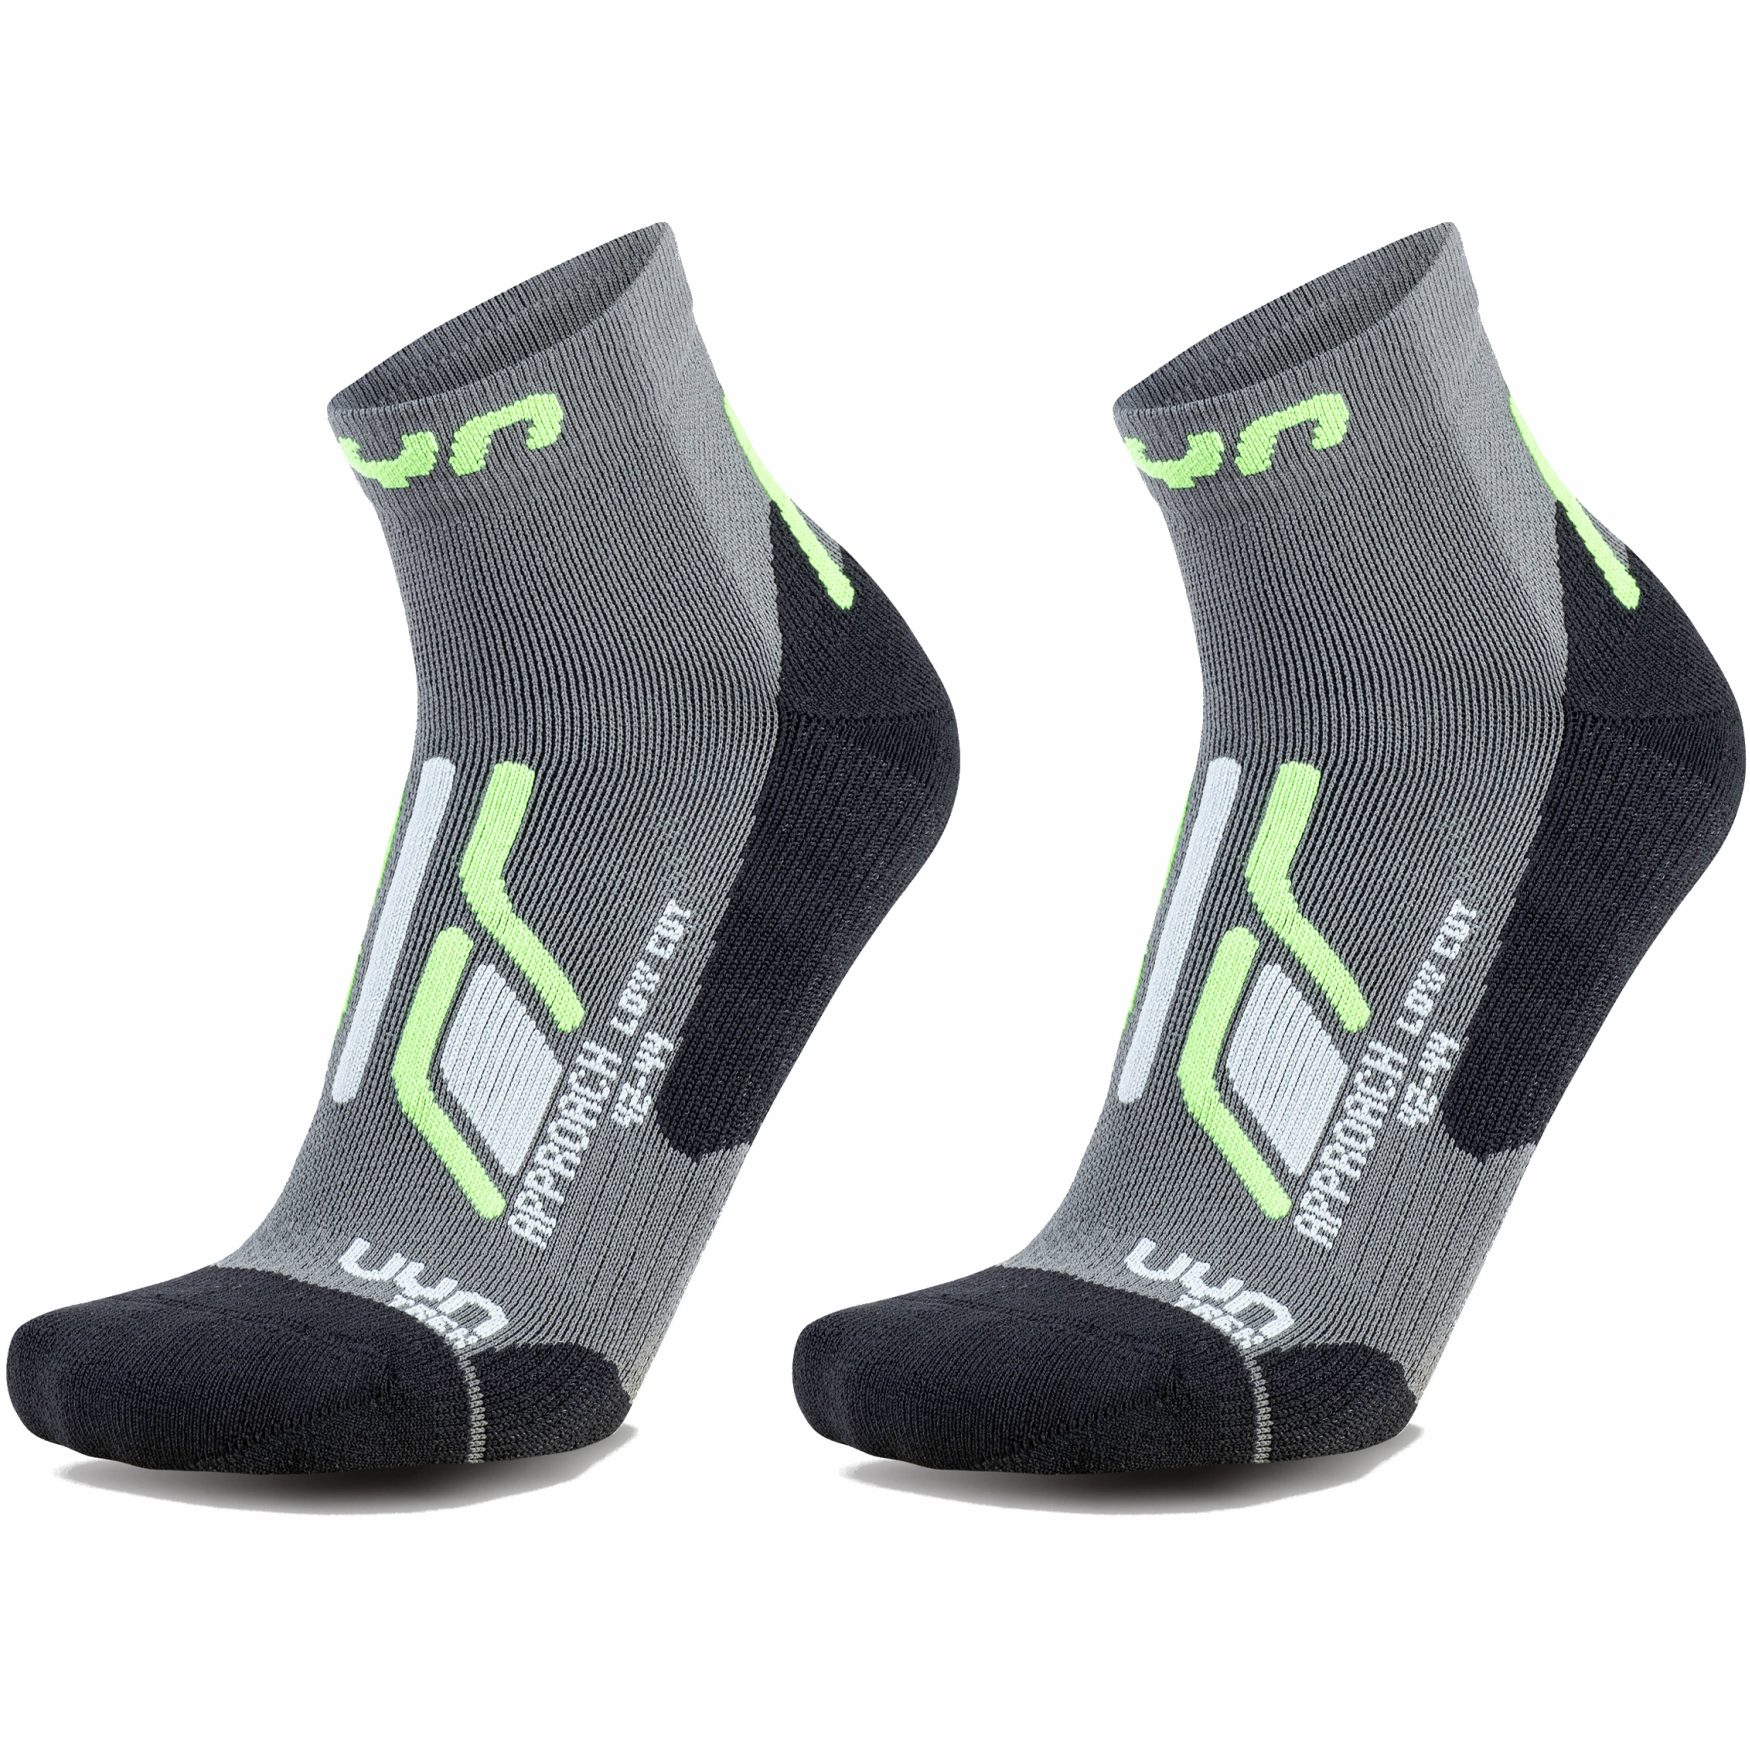 Picture of UYN Trekking Approach Low Cut Socks Men 2 Pairs Pack - Grey/Green